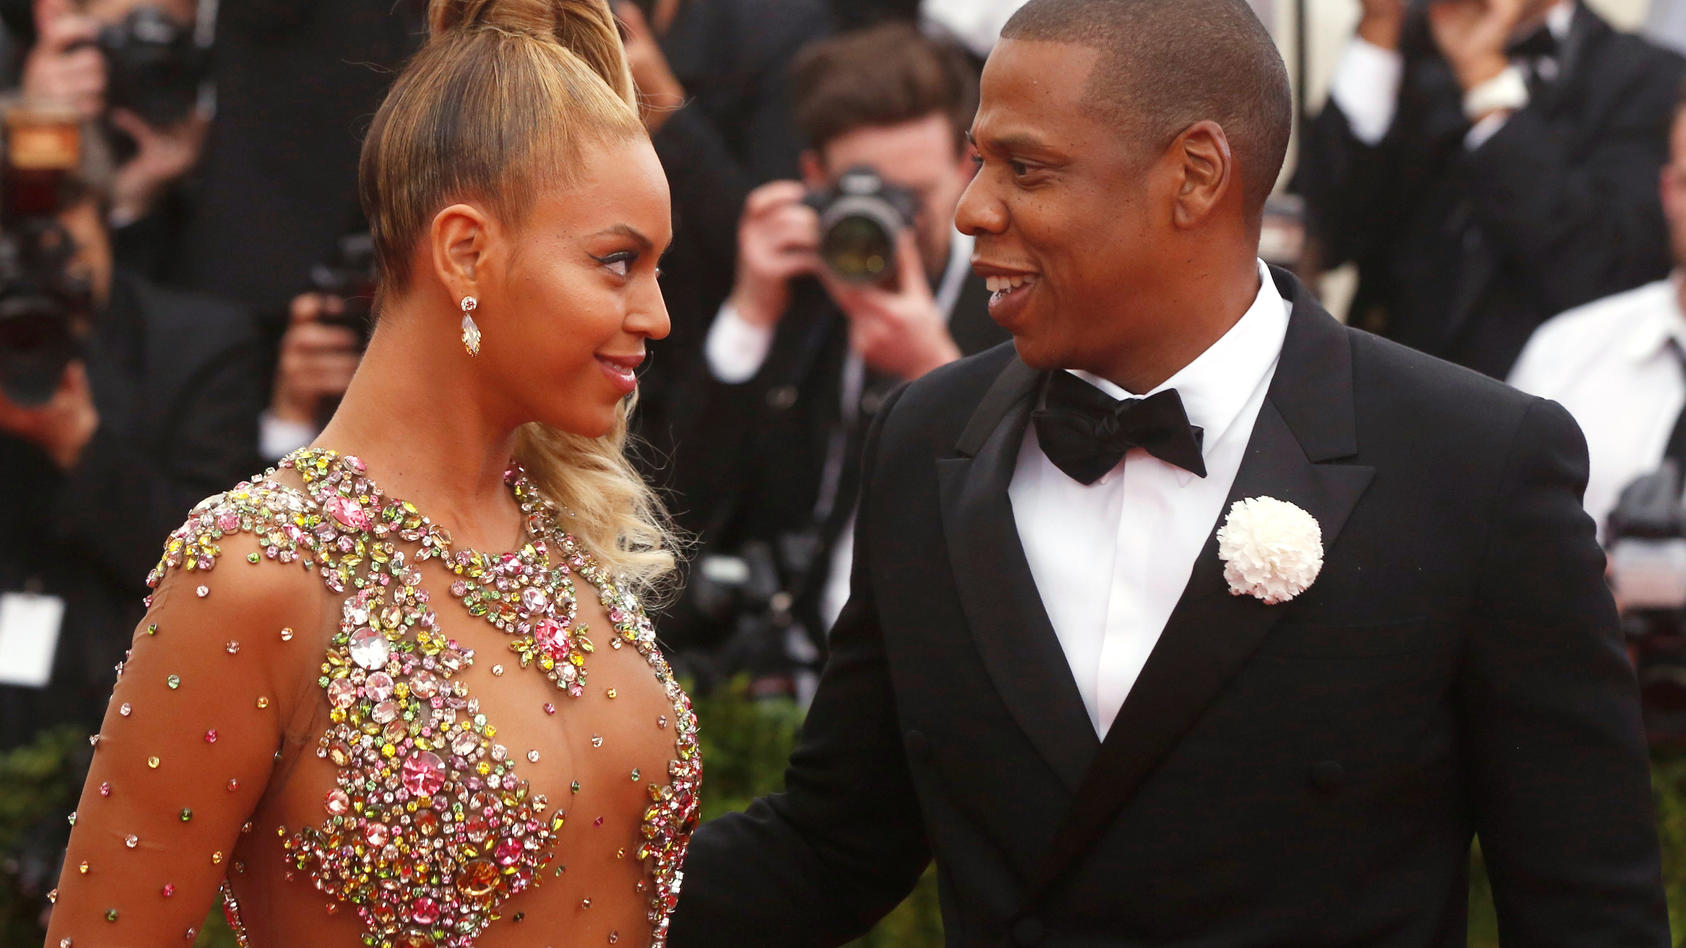 FILE PHOTO - Beyonce arrives with husband Jay-Z at the Metropolitan Museum of Art Costume Institute Gala 2015 celebrating the opening of "China: Through the Looking Glass," in Manhattan, New York, U.S. on May 4, 2015.   REUTERS/Lucas Jackson/File Pho